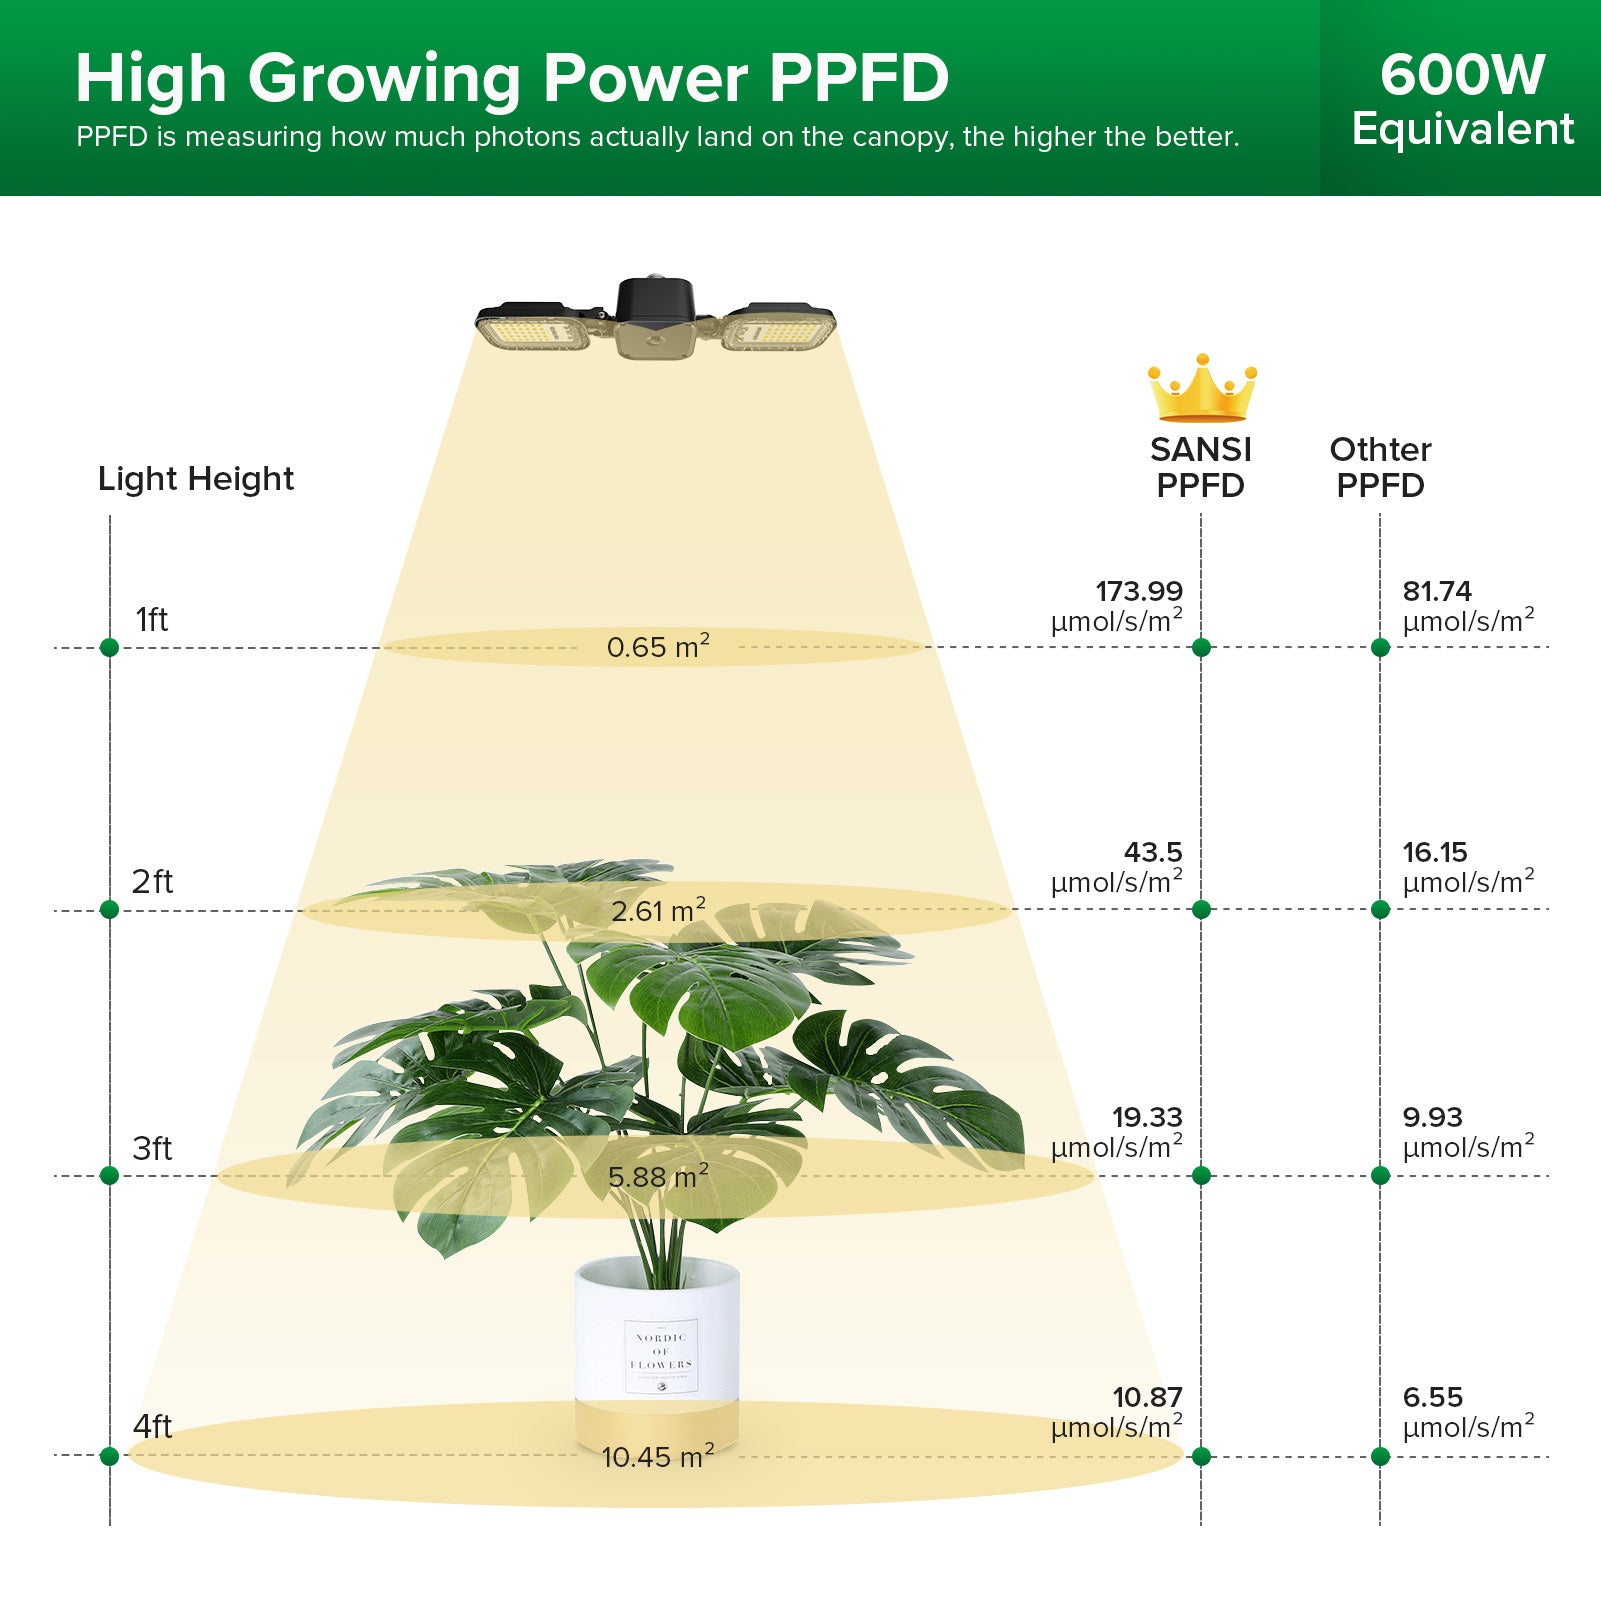 60W Panel Led Grow Light with folding wings for indoorplanting with high PPFD, 600W equivalent